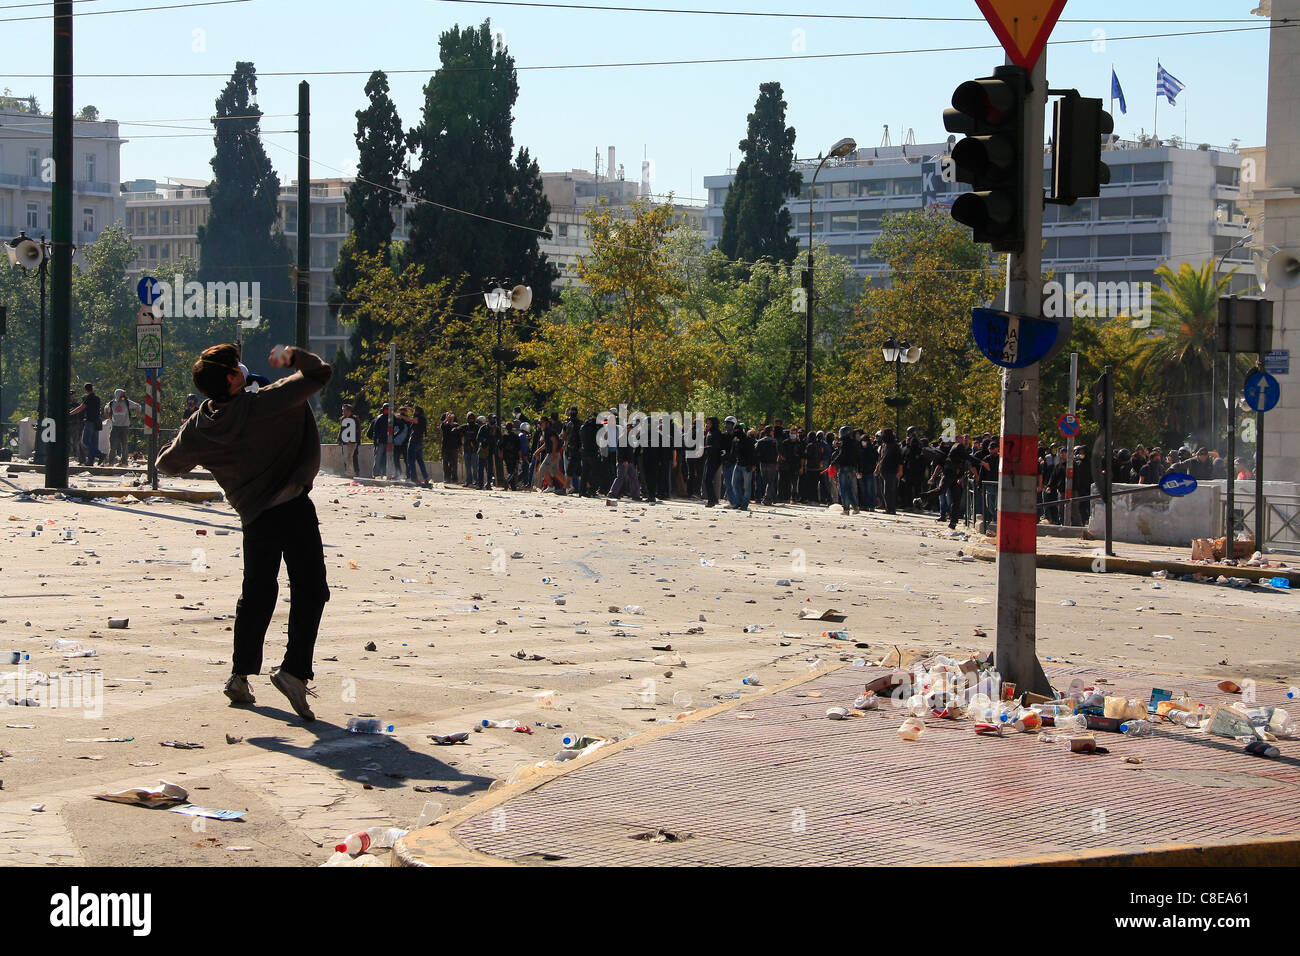 GREECE, ATHENS, SYNTAGMA SQUARE, 20/10/2011. Protests against Greek government's economic policy. Protester throws rock. Stock Photo